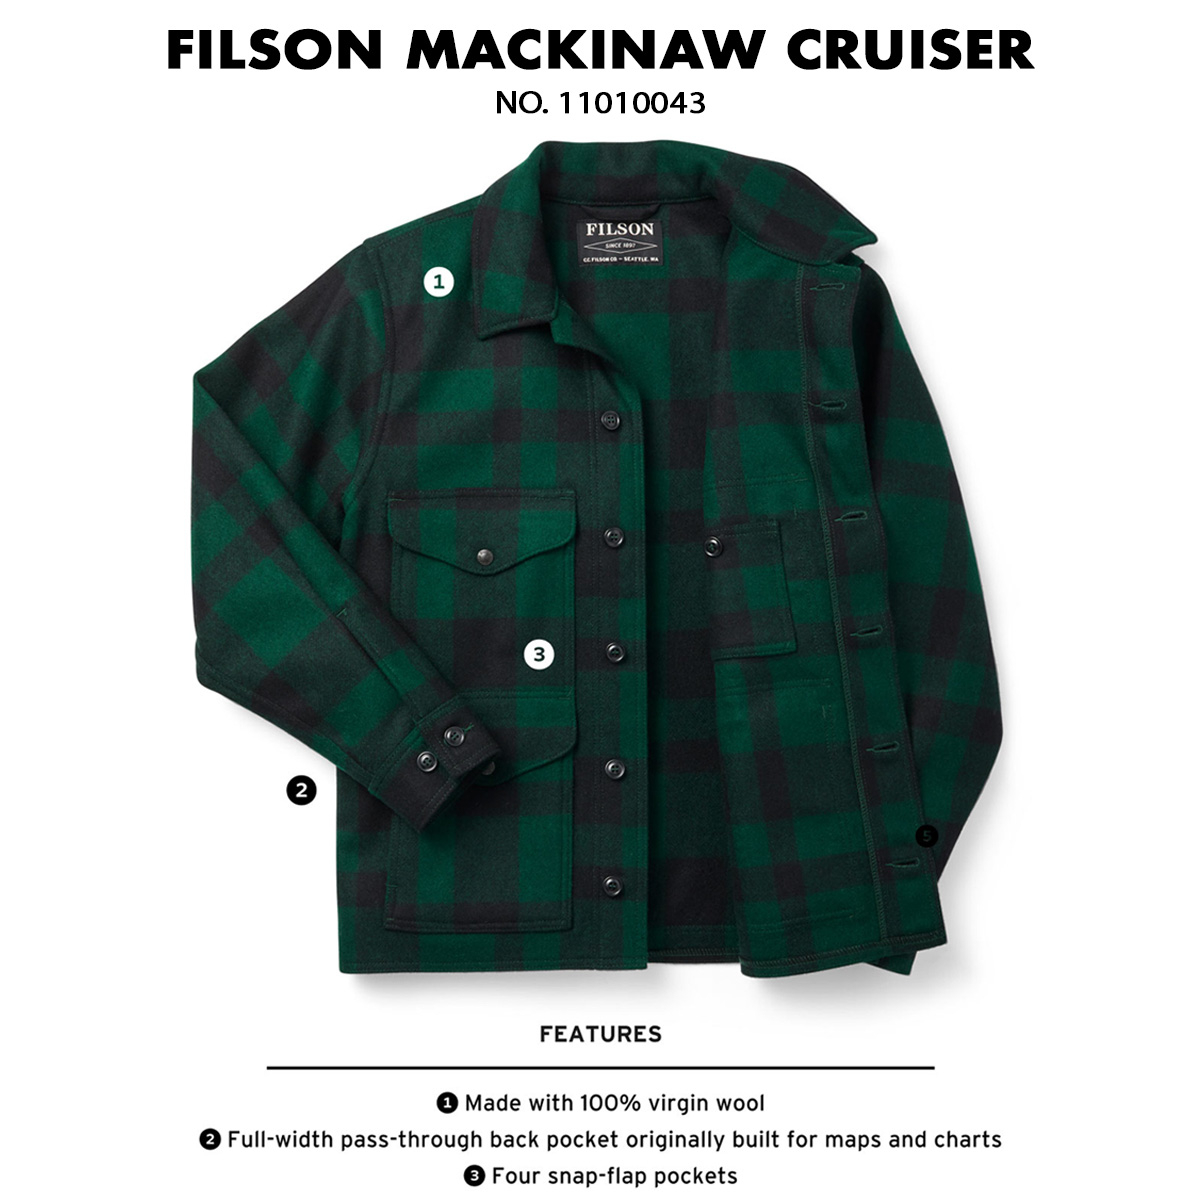 Filson Mackinaw Wool Cruiser Jacket Green Black, Made of 100% virgin Mackinaw Wool for comfort, natural water-repellency and insulating warmth in any weather conditions.